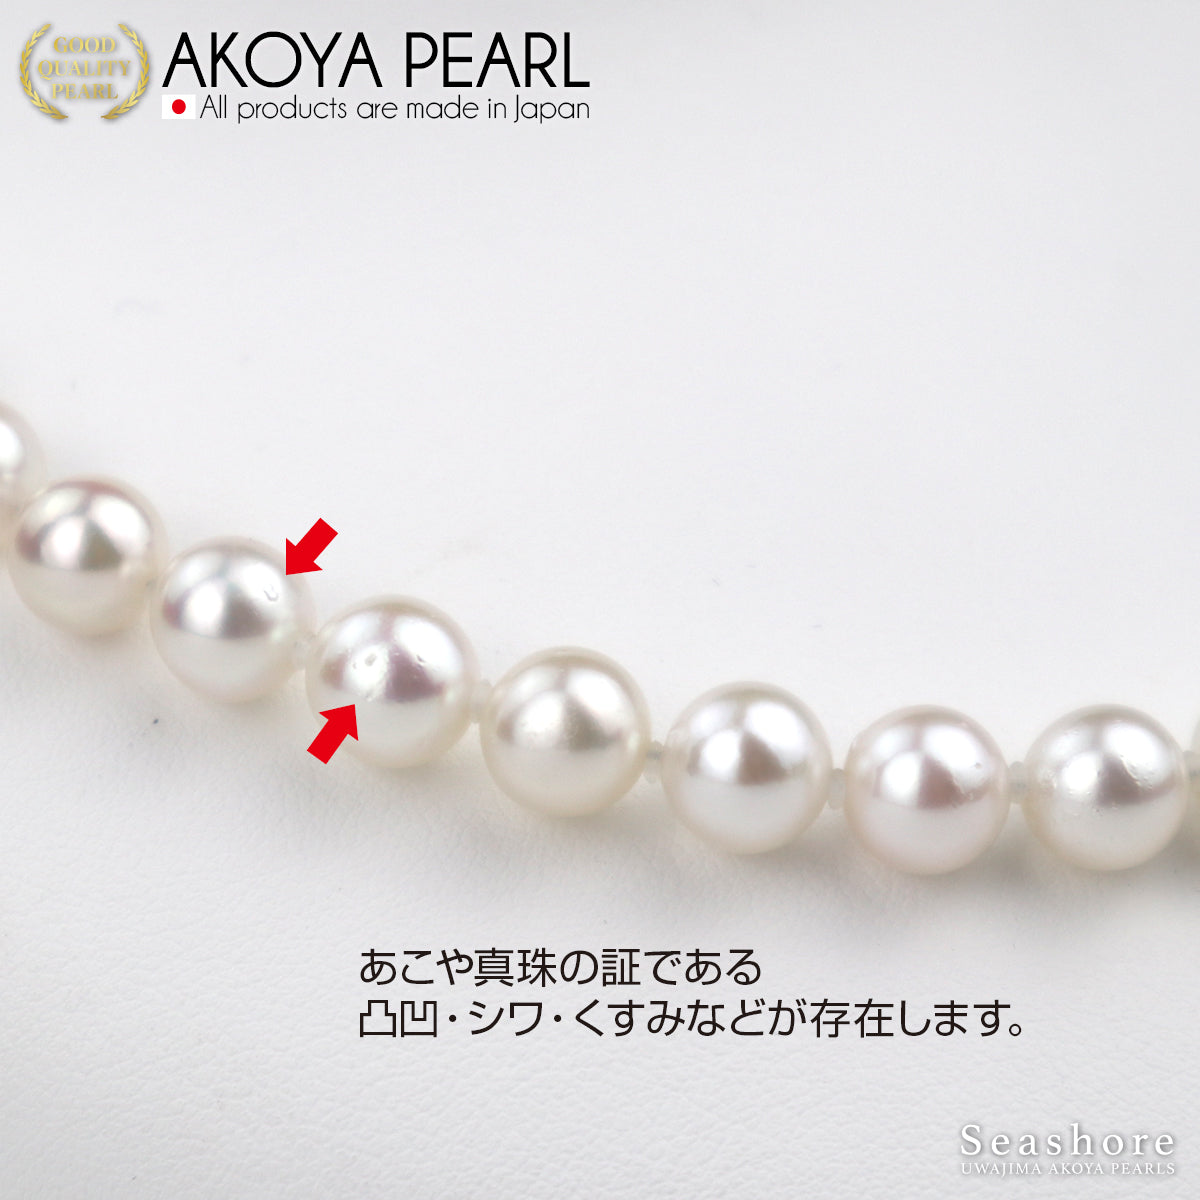 [Natural White] Uncolored Akoya Pearl Formal Necklace Set of 2 [8.5-9.0mm] (Earrings/Earrings) Certificate of Authenticity Storage Case Included Ceremonies